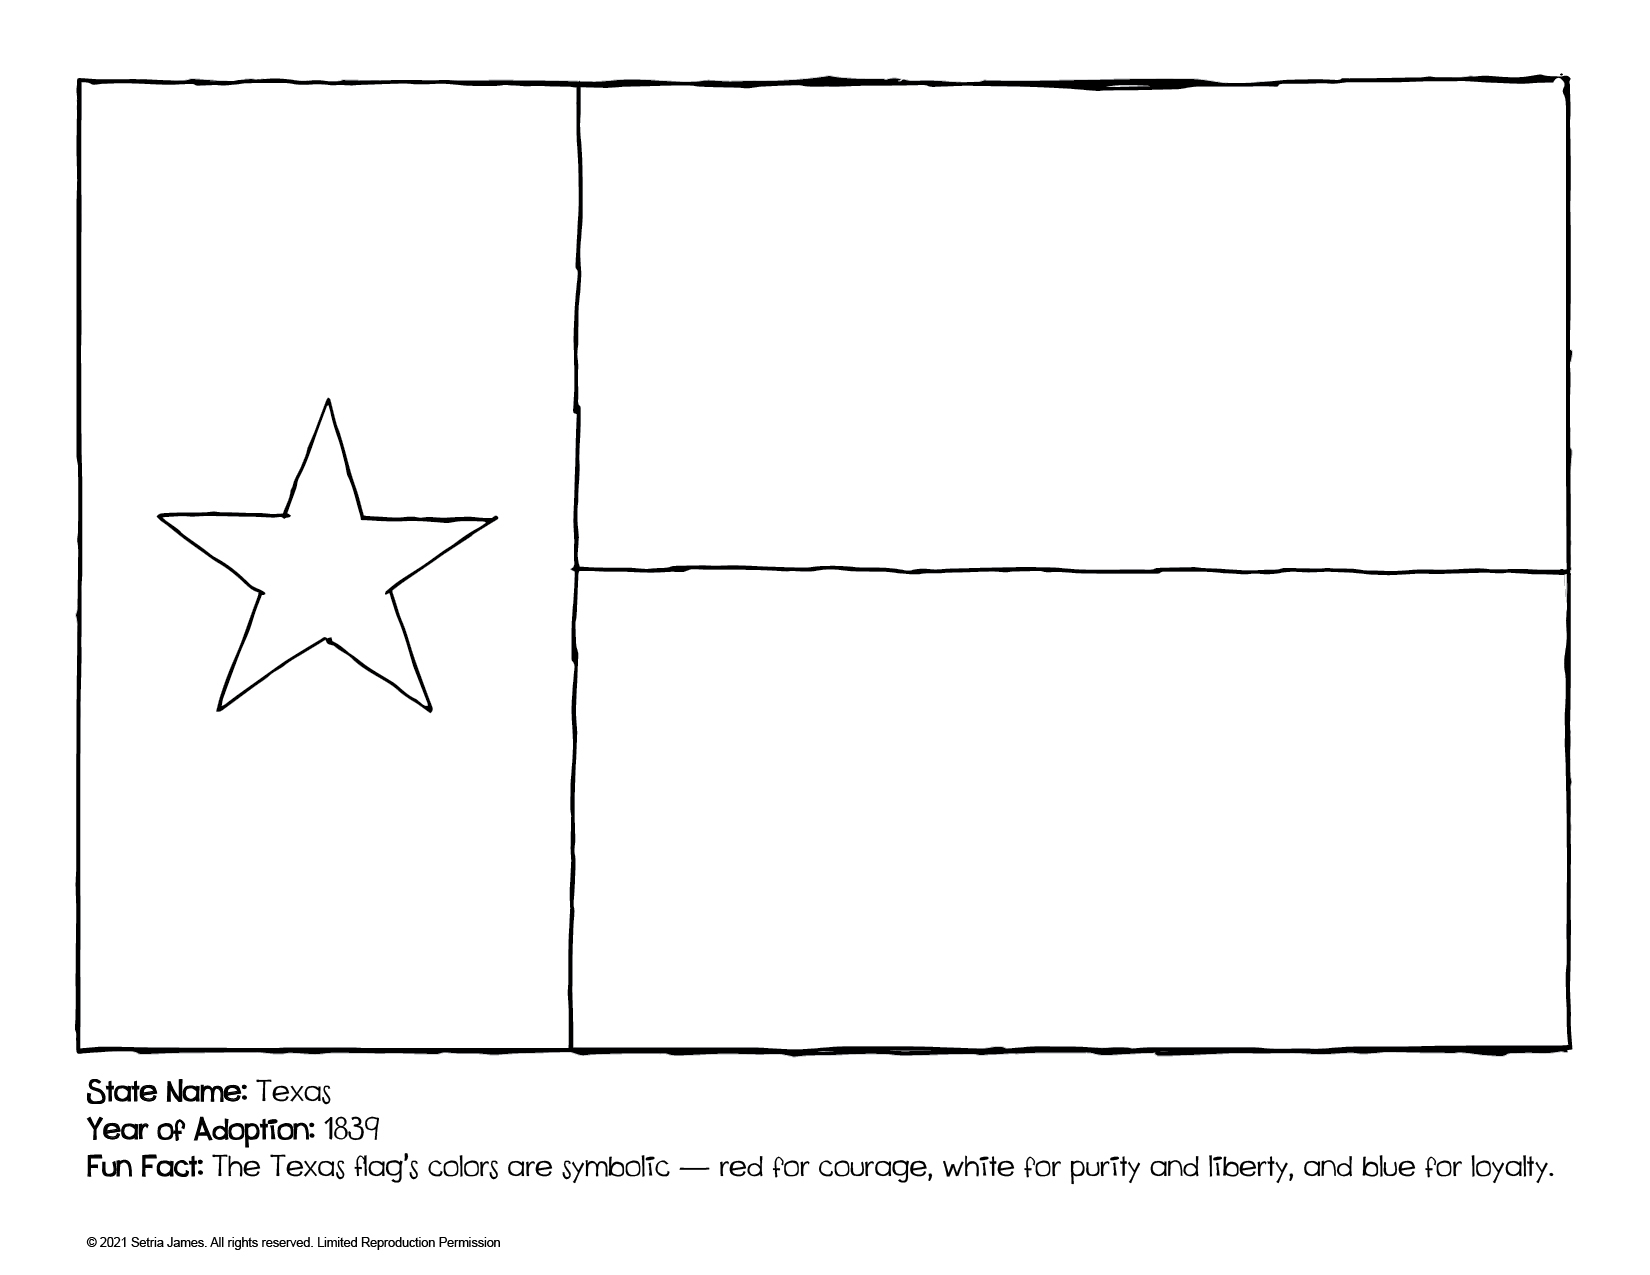 Doodles united states states flags state flag history state flag coloring doodles ave